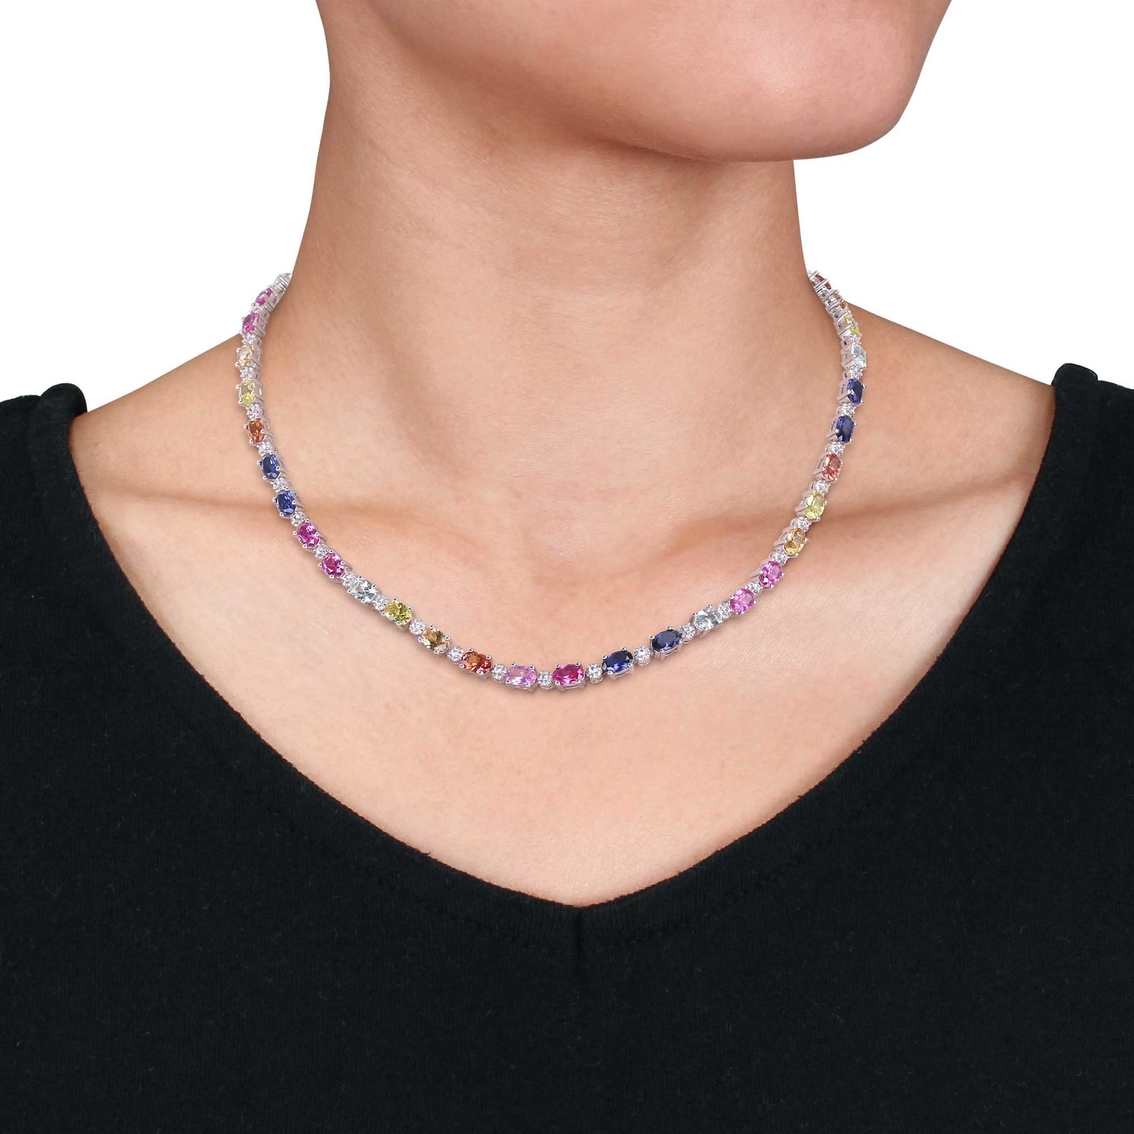 Sofia B. Sterling Silver Multicolor Lab Created Sapphire Tennis Necklace - Image 3 of 3